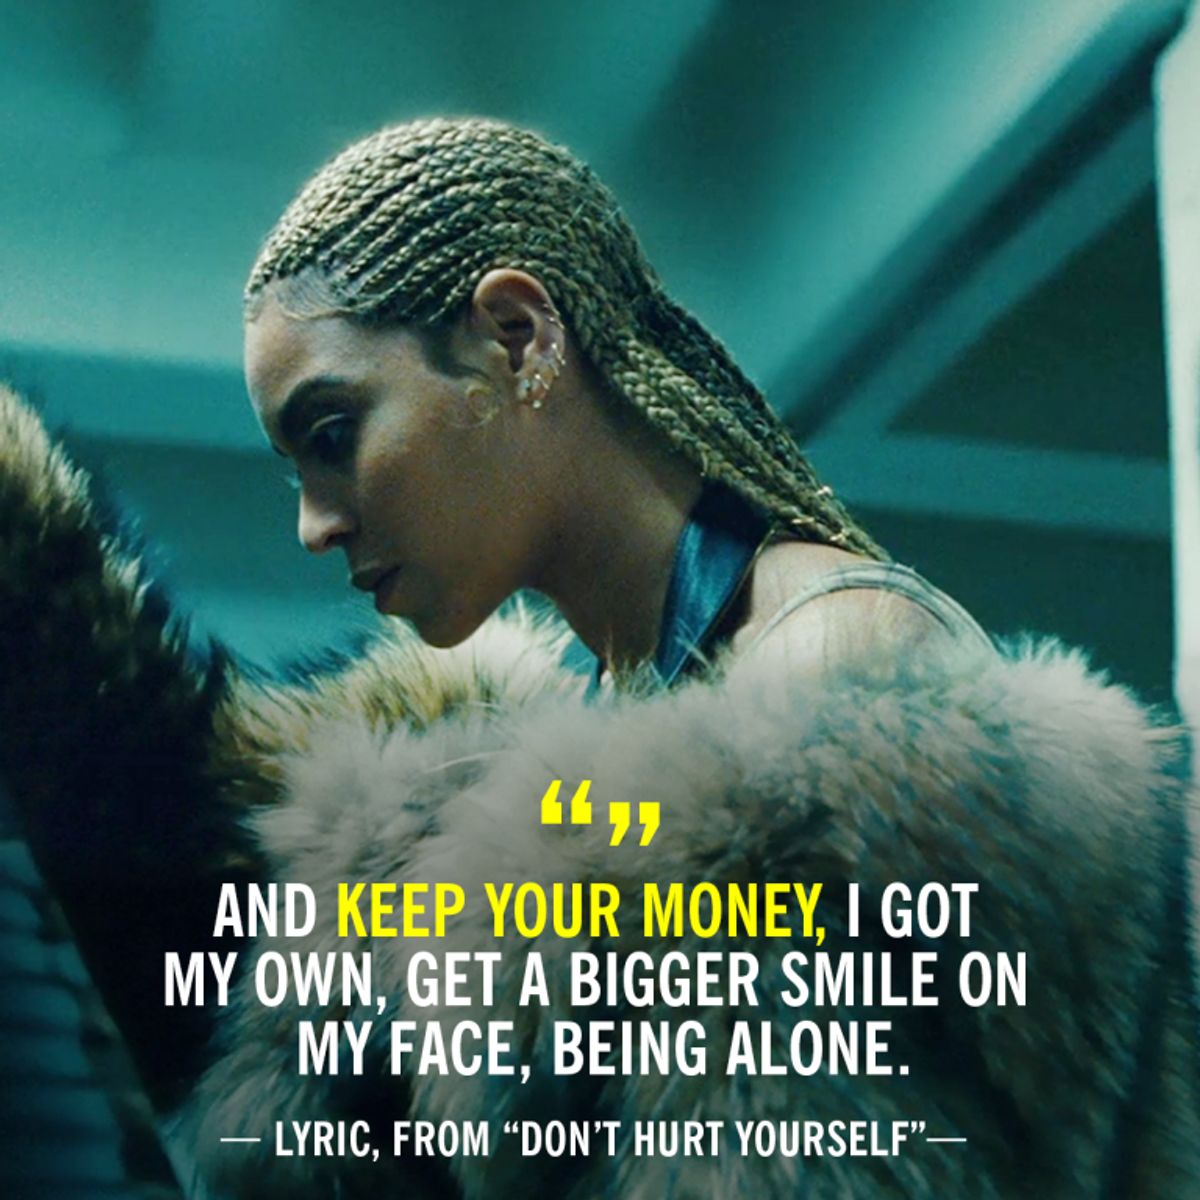 You Are Lit, As Told By Queen B